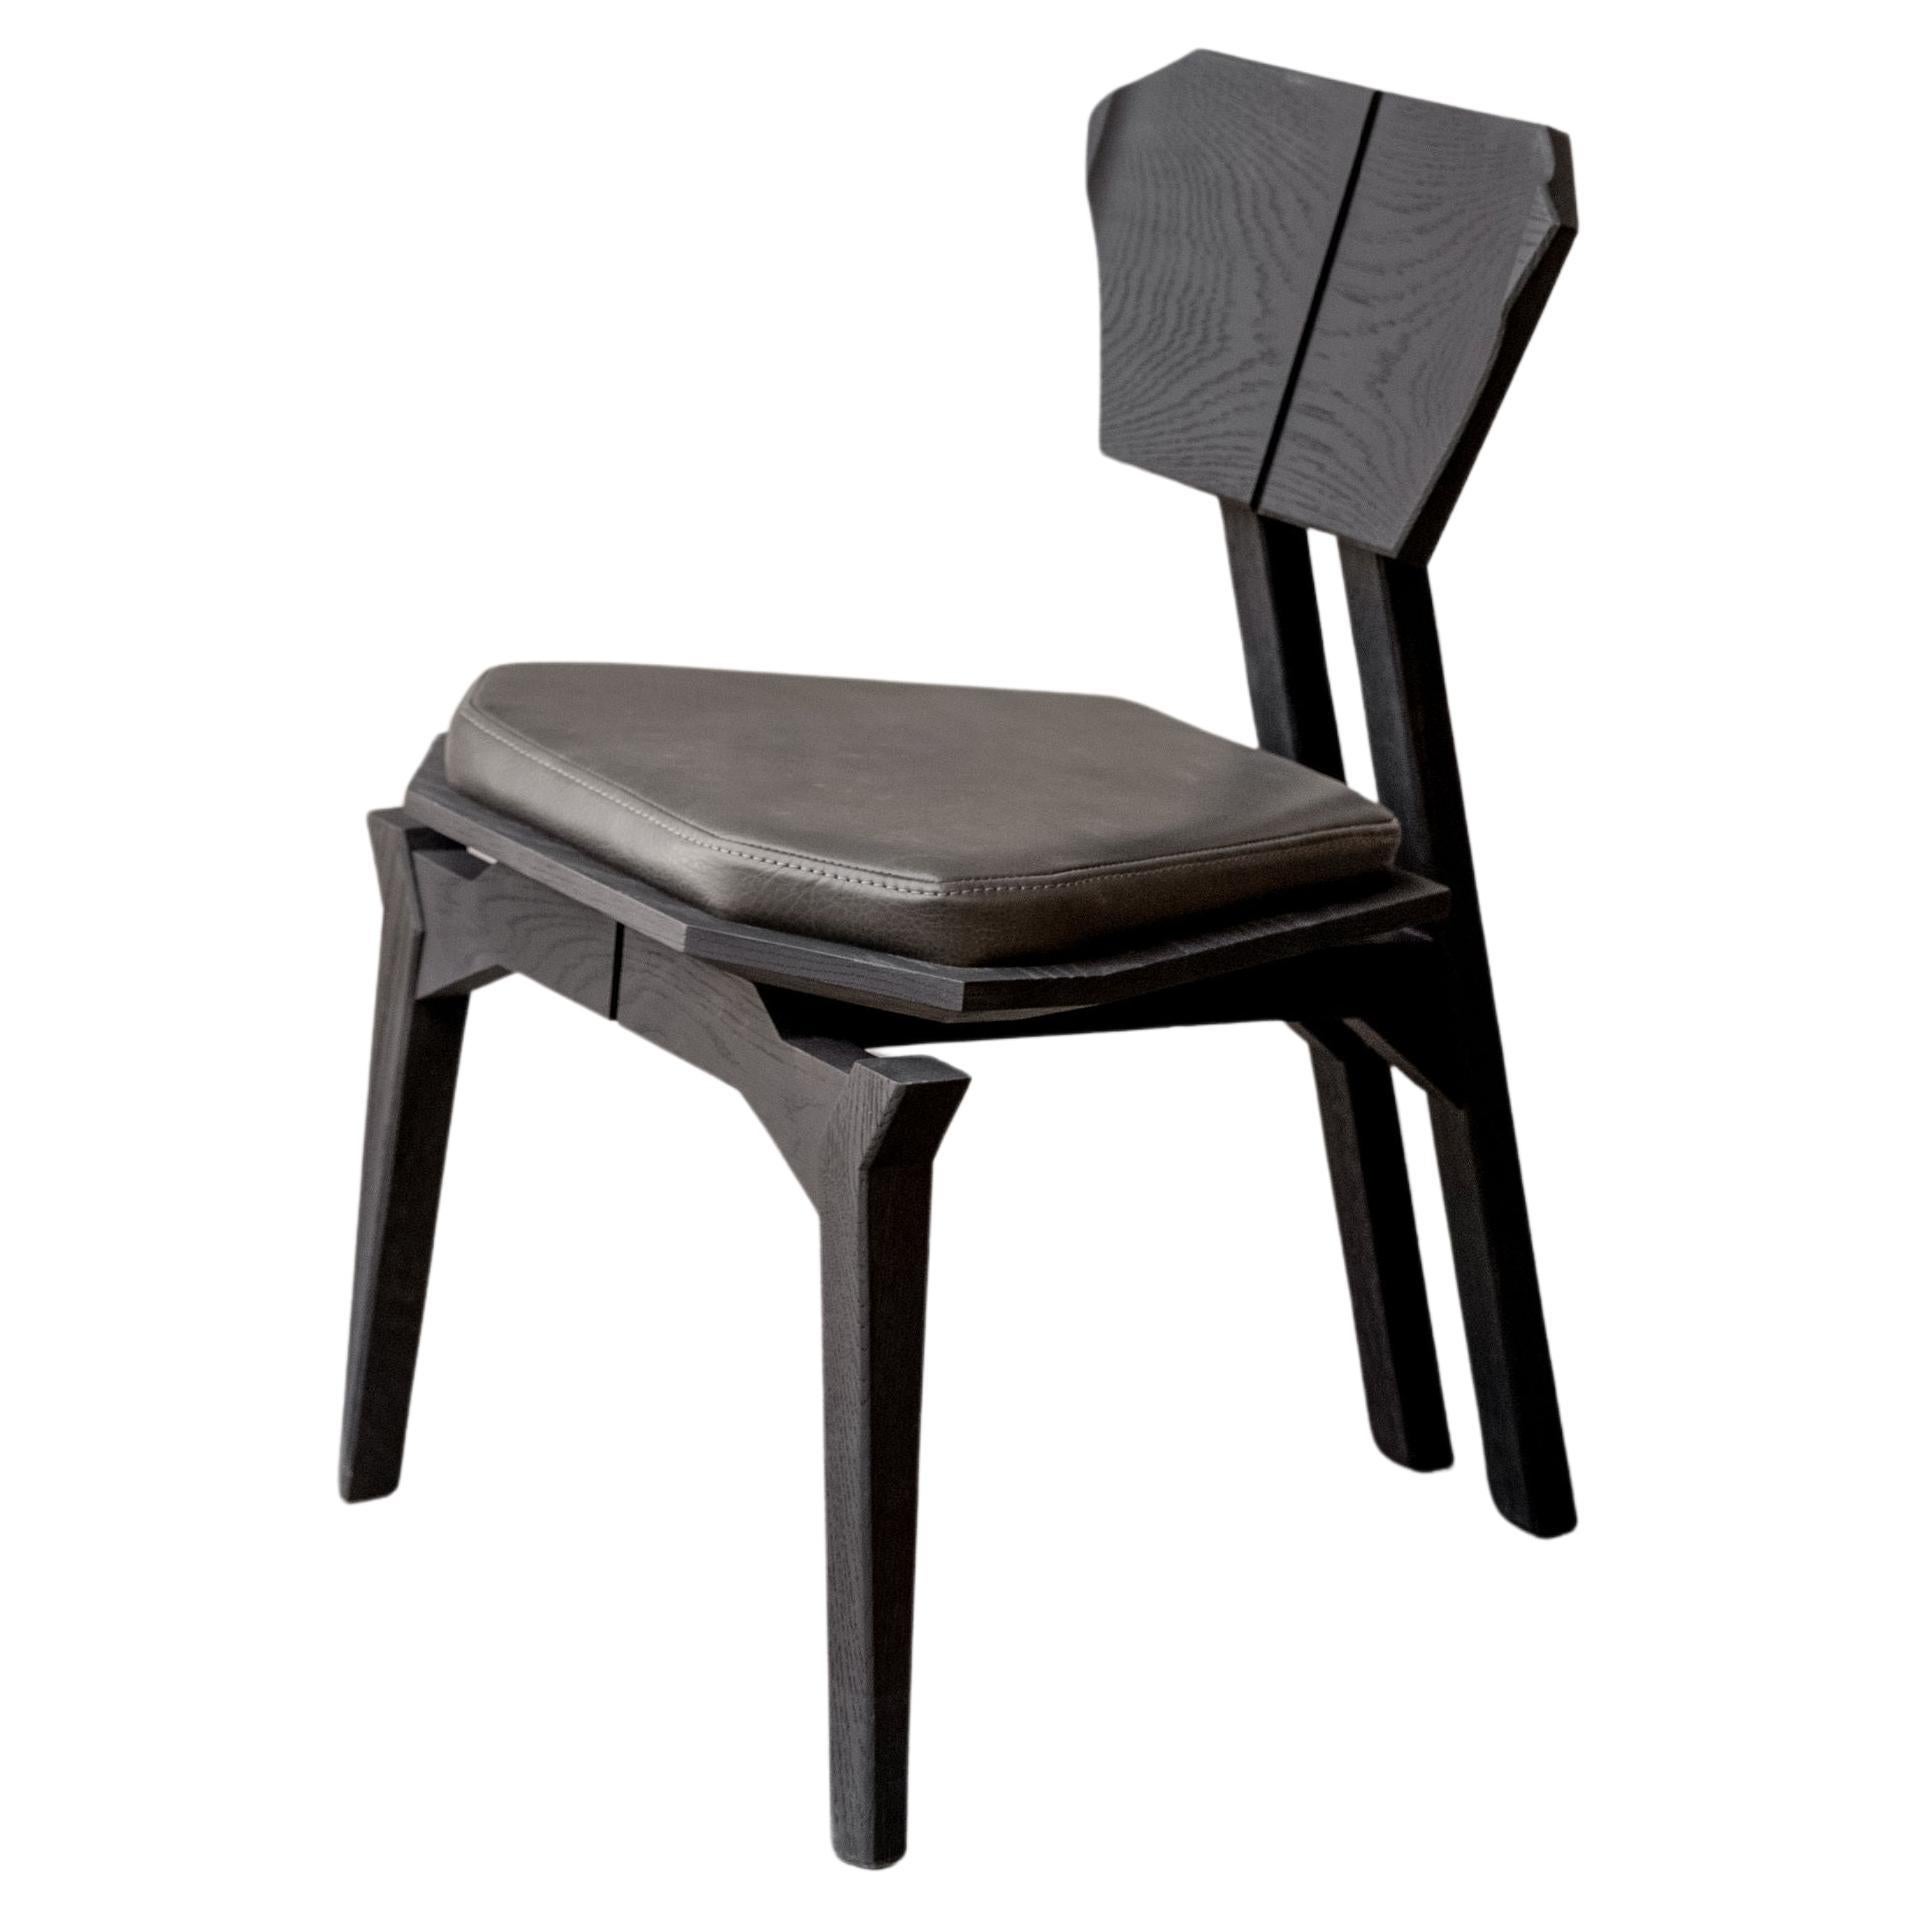 Angulo Chair For Sale